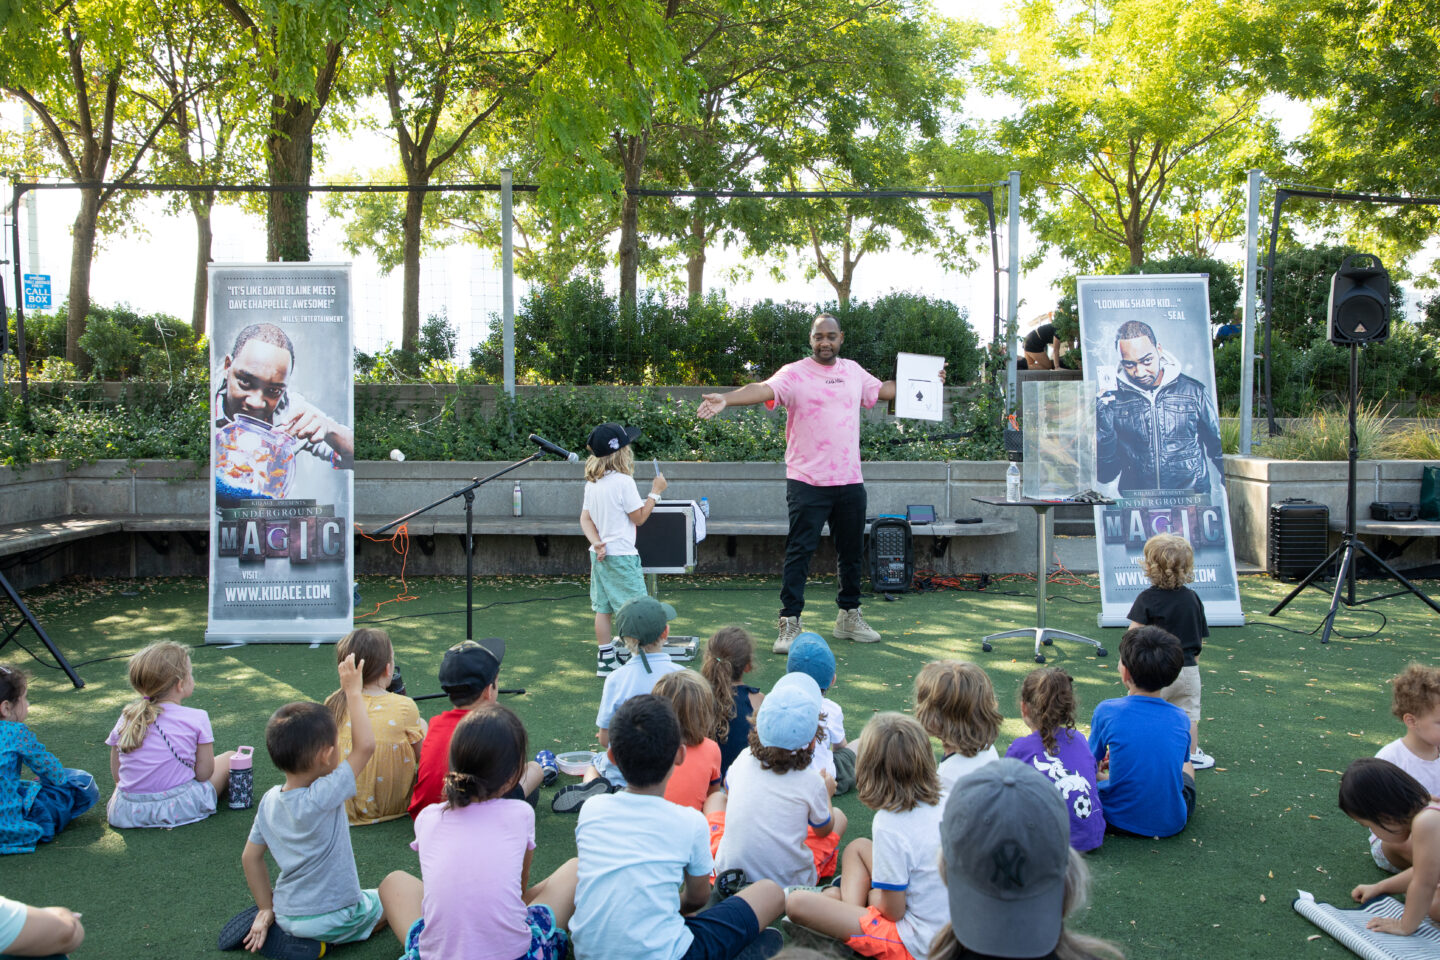 Magician Kid Ace performs at Pier 25 during Hudson RiverKids in front of kids on turf field